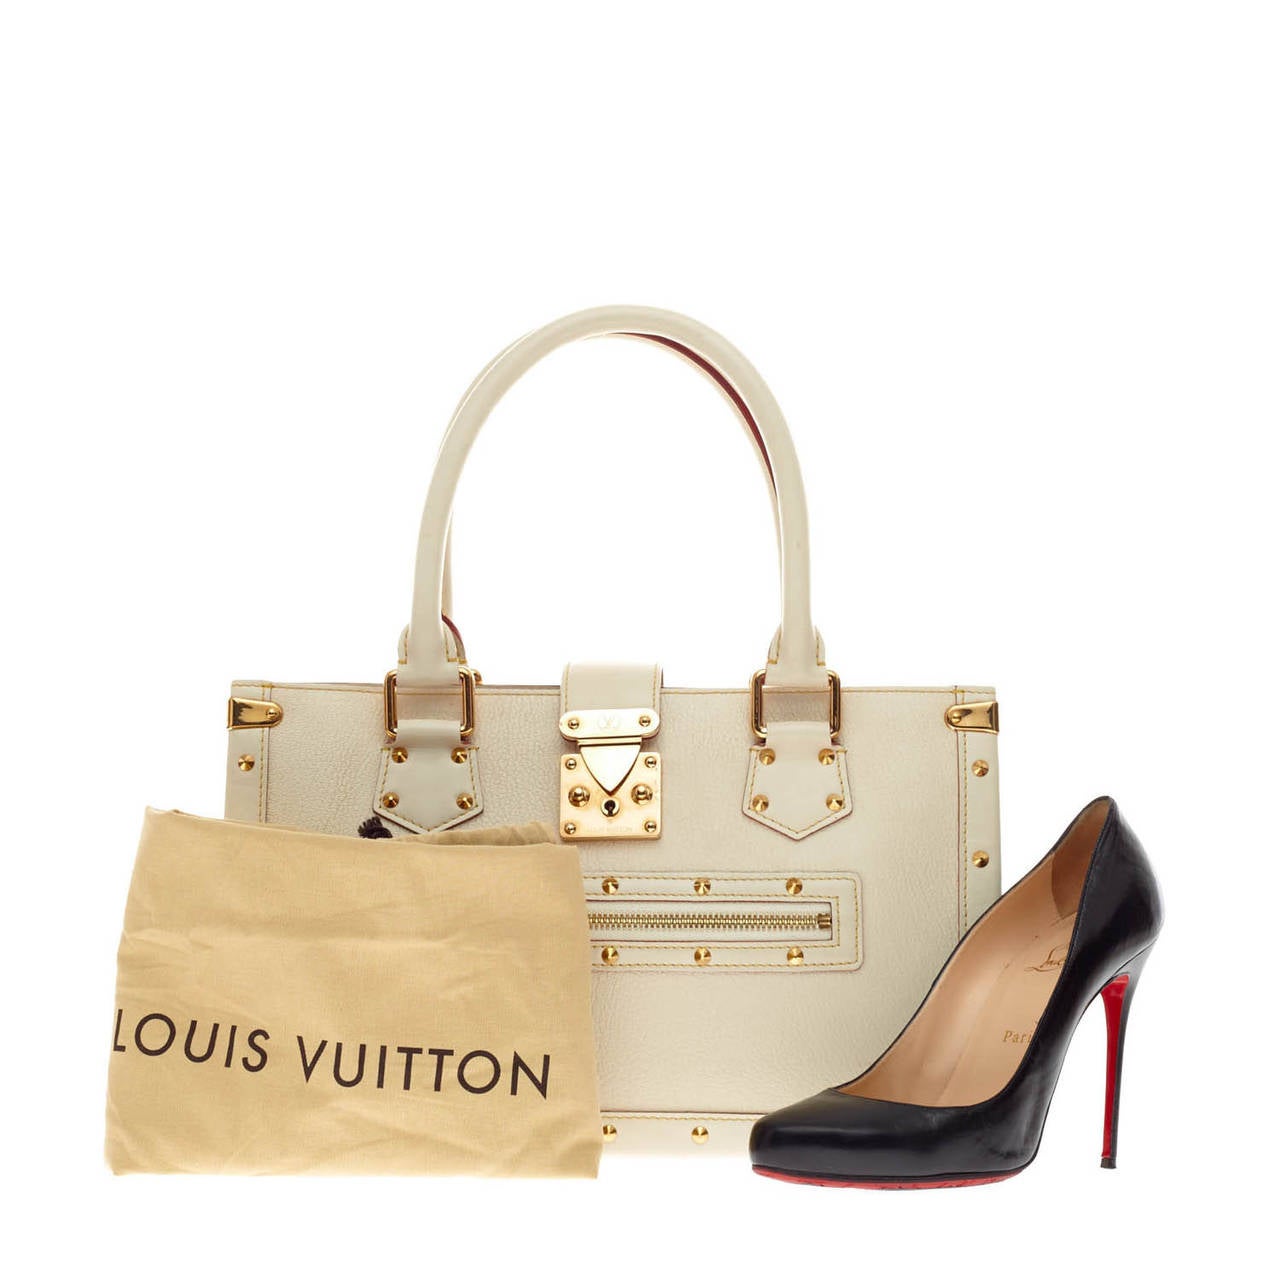 This authentic Louis Vuitton Suhali Le Fabuleux Leather showcases a structured yet eye-catching elegant design. Crafted from sturdy off-white goatskin leather, this bag features polished brass hardware that includes corner plates and decorative